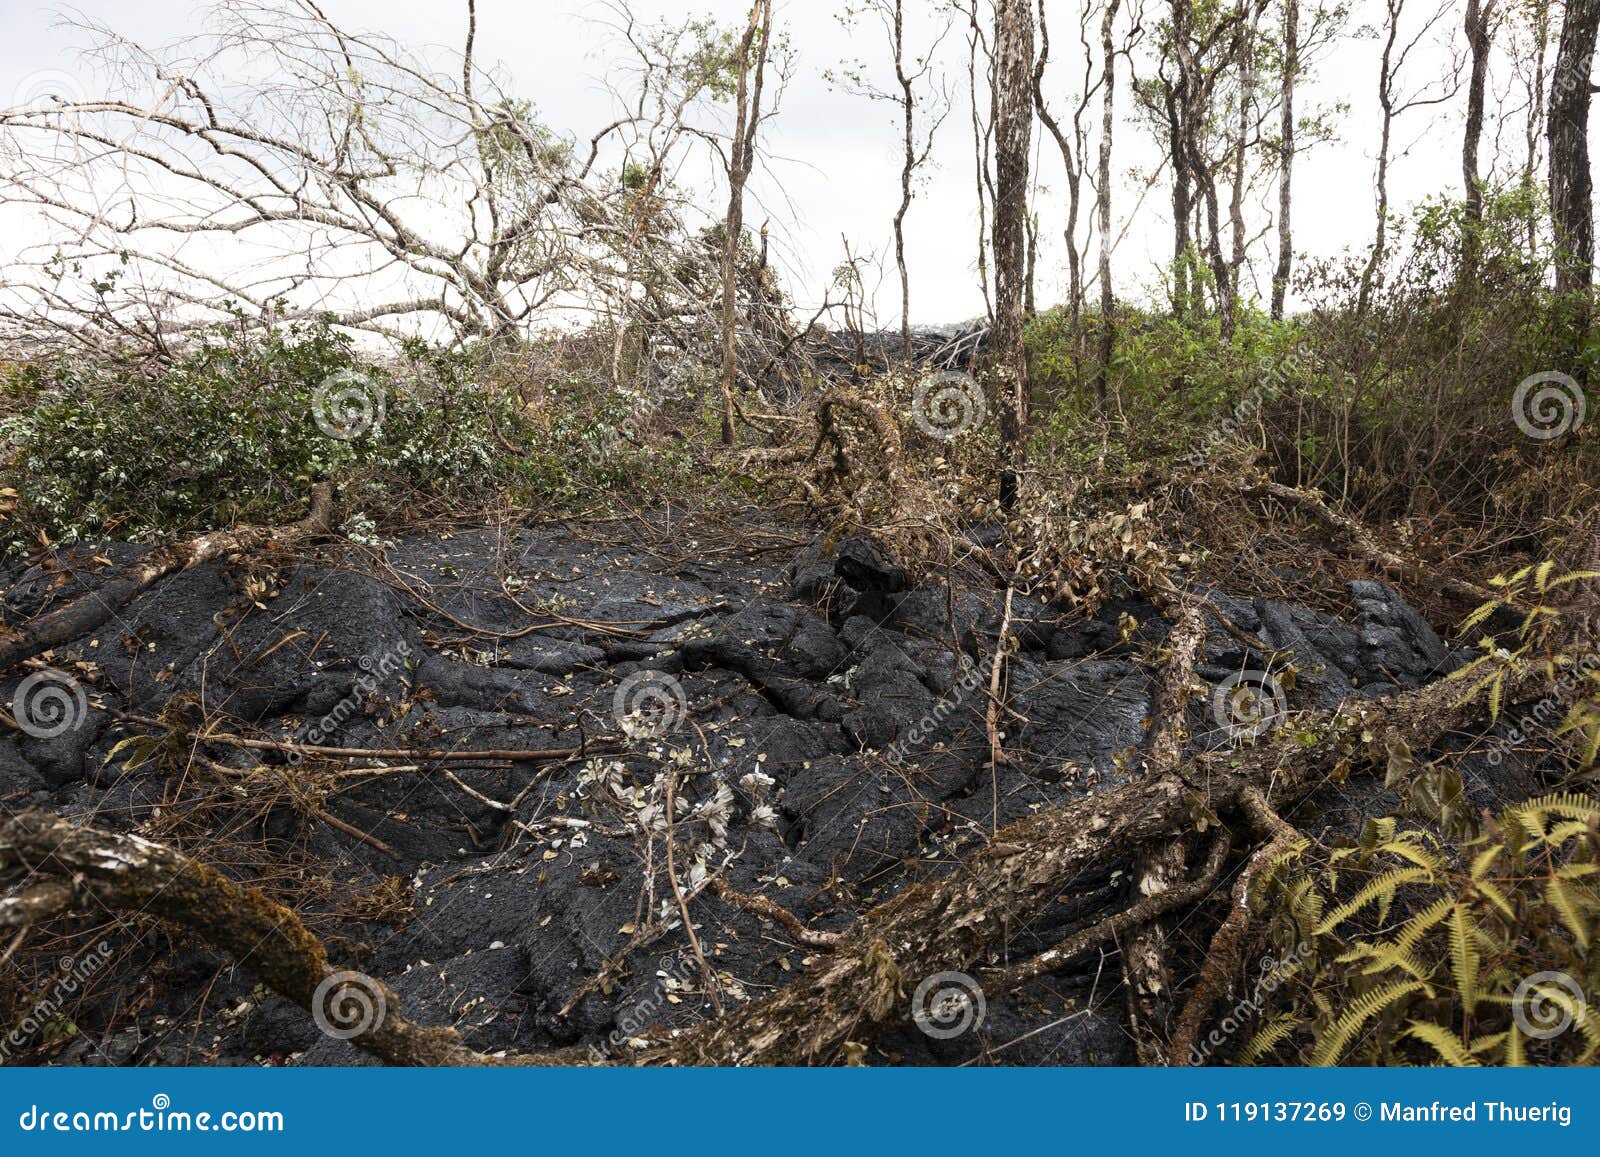 Lava Flow in Hawaii, Which Has Burned Trees and Shrubs Stock Image ...